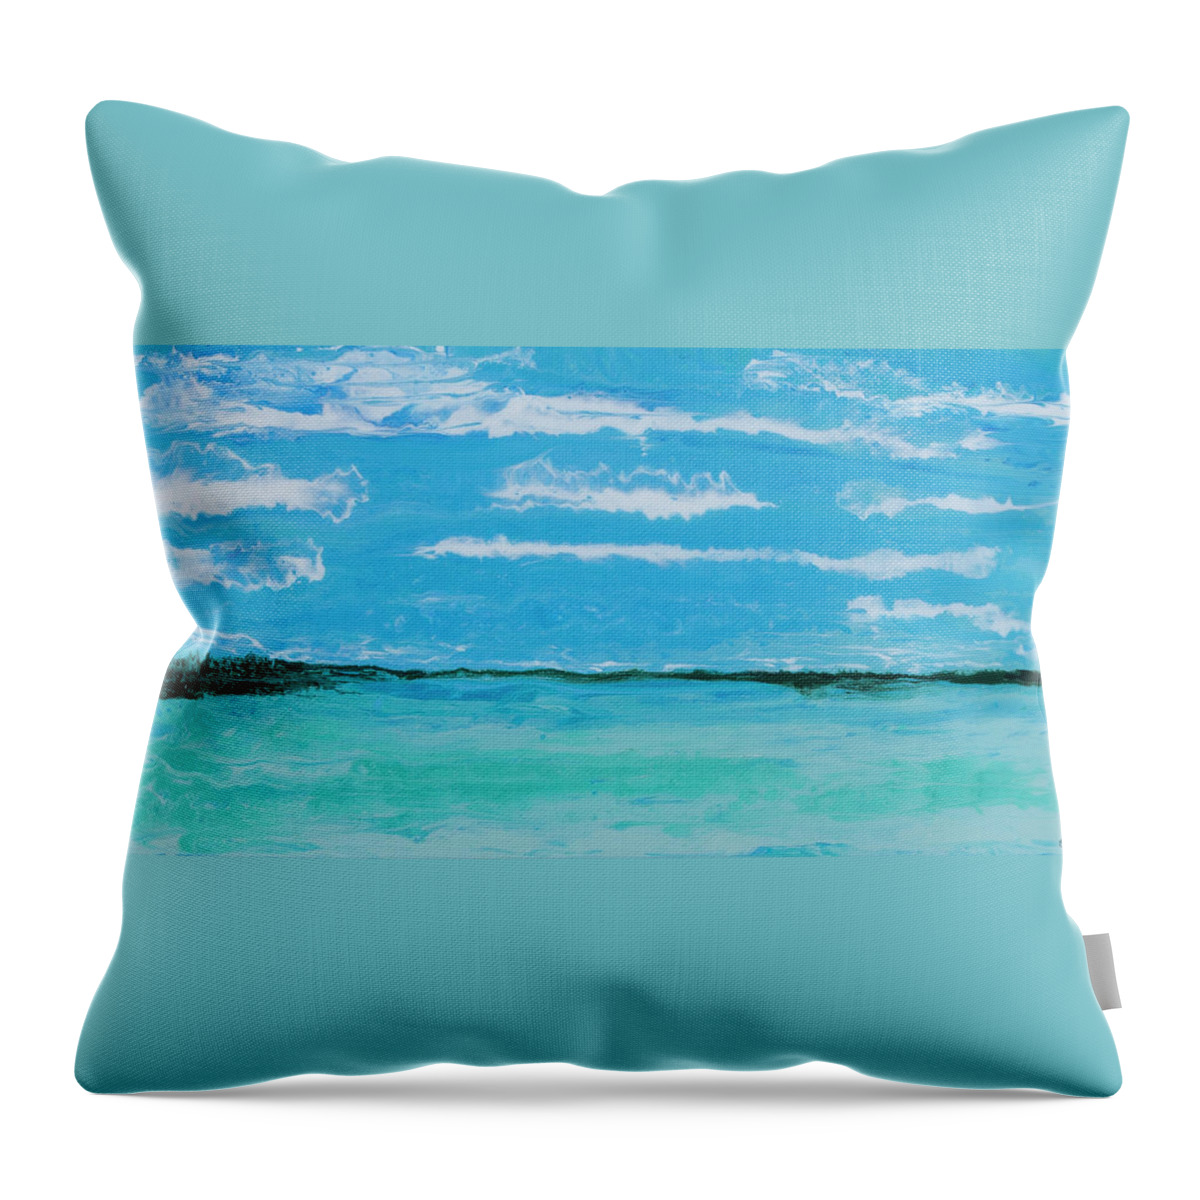 Seascape Throw Pillow featuring the painting West Harbor Key Channel by Steve Shaw